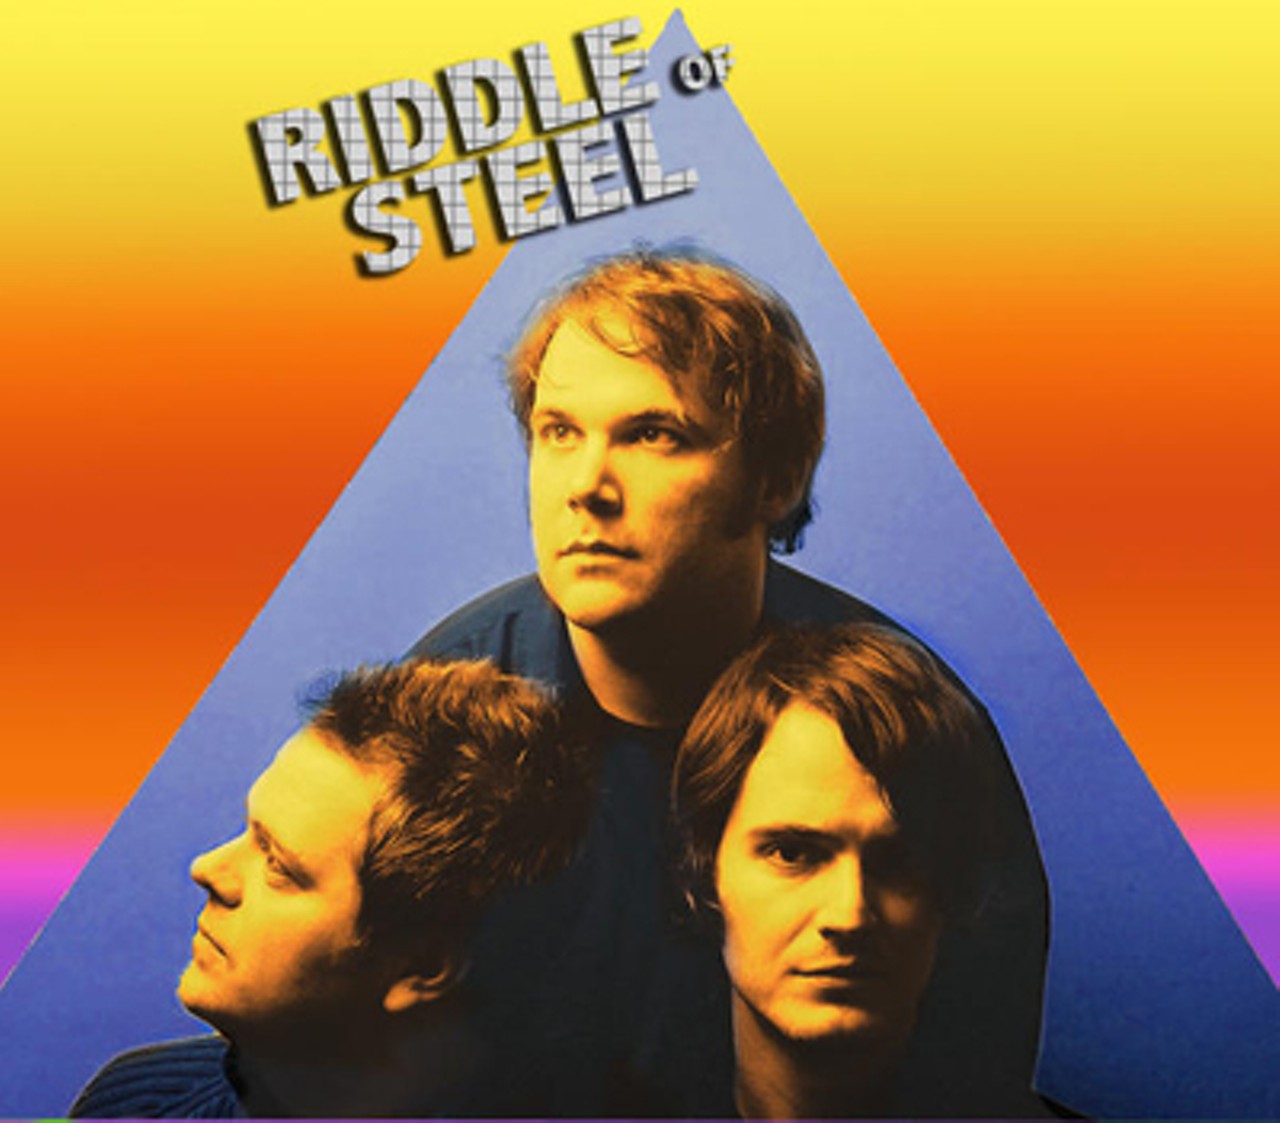 Riddle of Steel, Best Old Band.